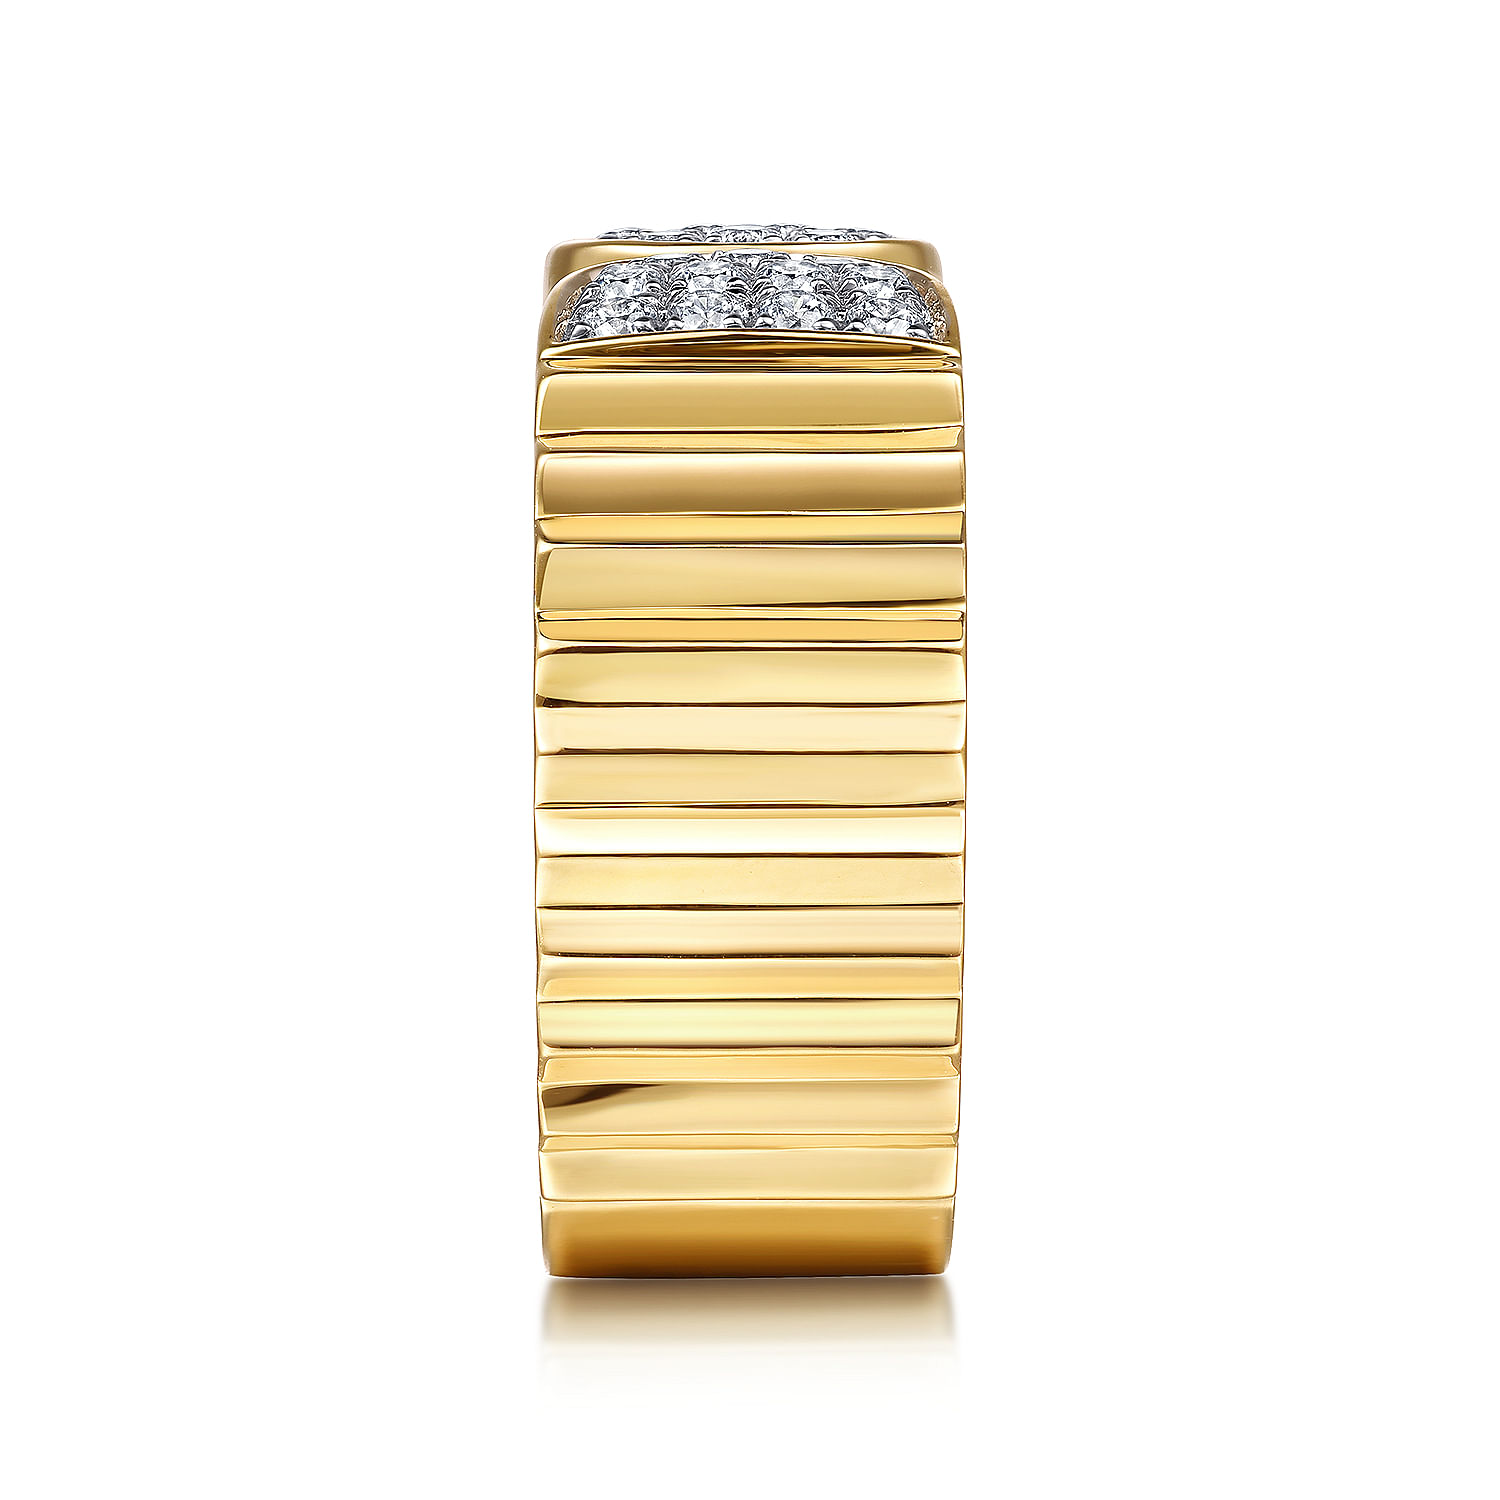 14K Yellow Gold Open Ring with Diamond Pavé End Caps and Diamond Cut Texture